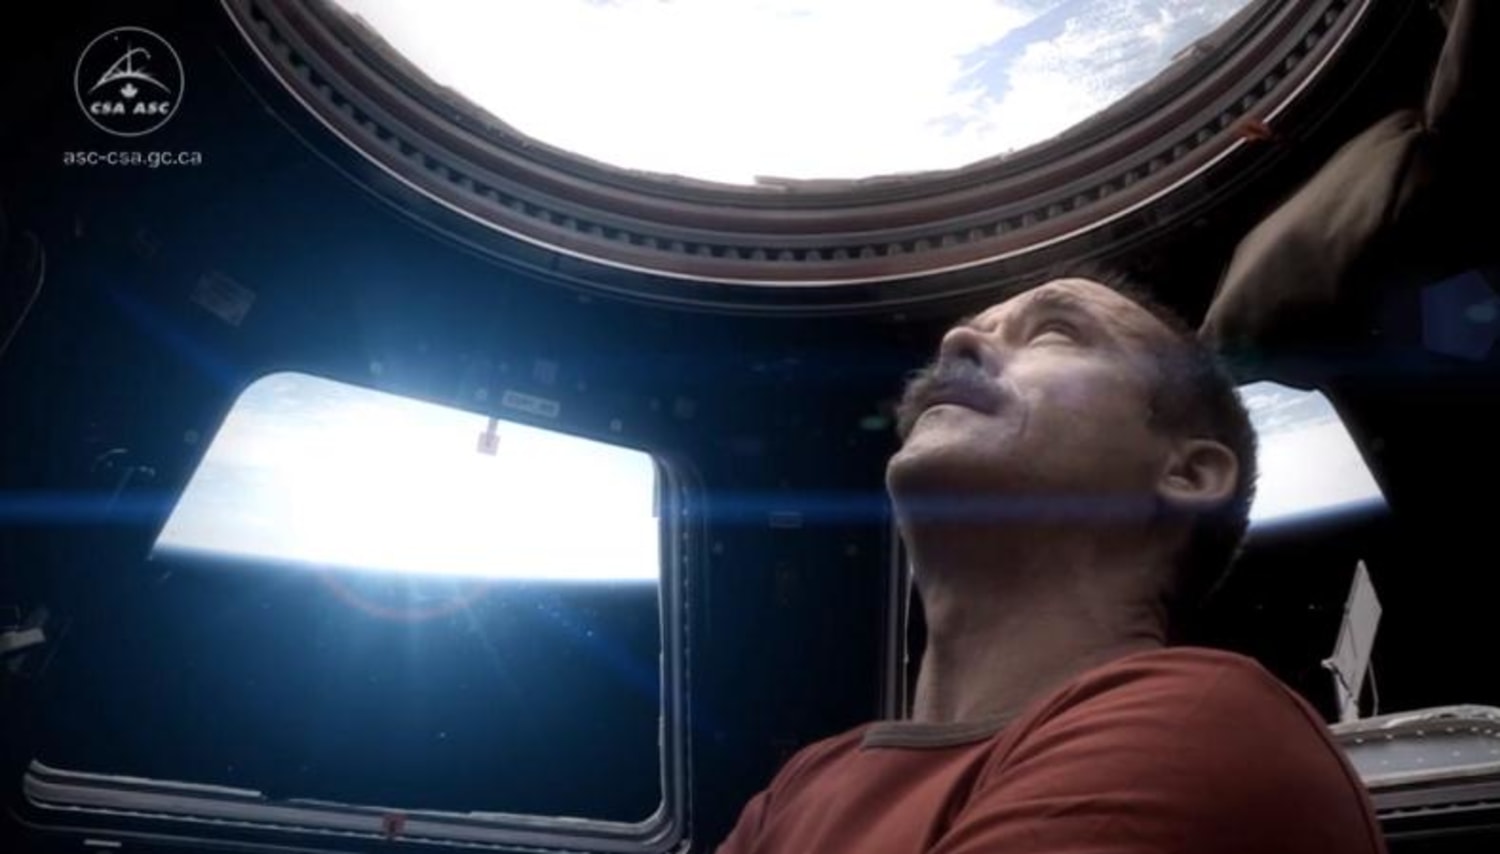 The stars different today': Astronaut Chris Hadfield films Bowie cover video in space